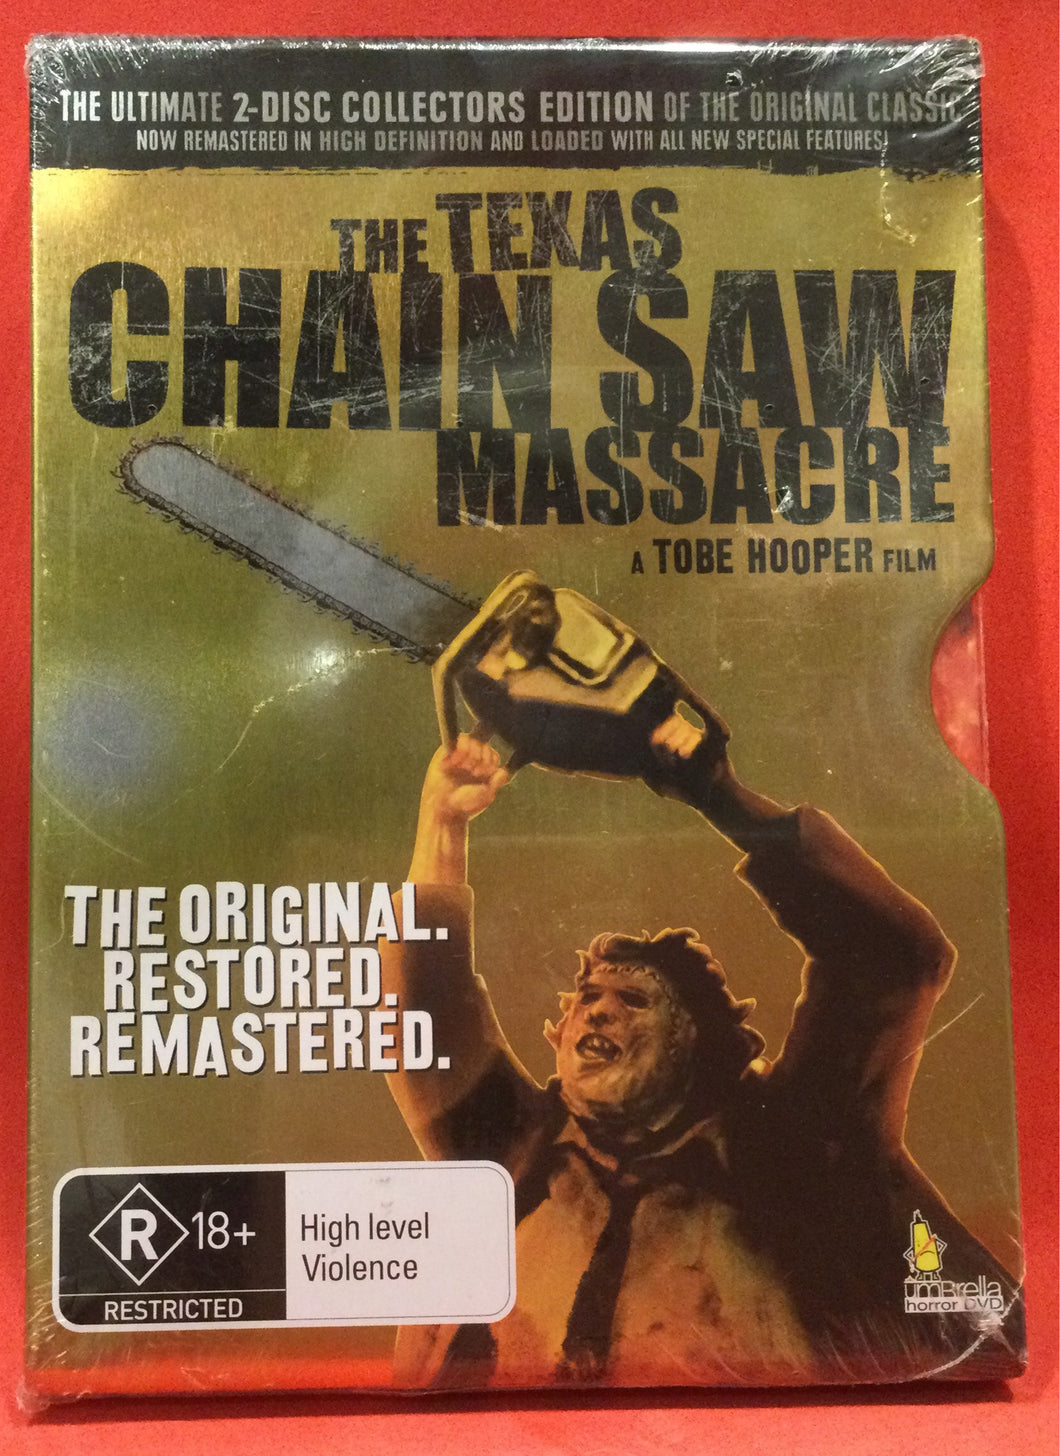 TEXAS CHAINSAW MASSACRE, THE - STEEL CASE - 2 DVD DISCS (SEALED)